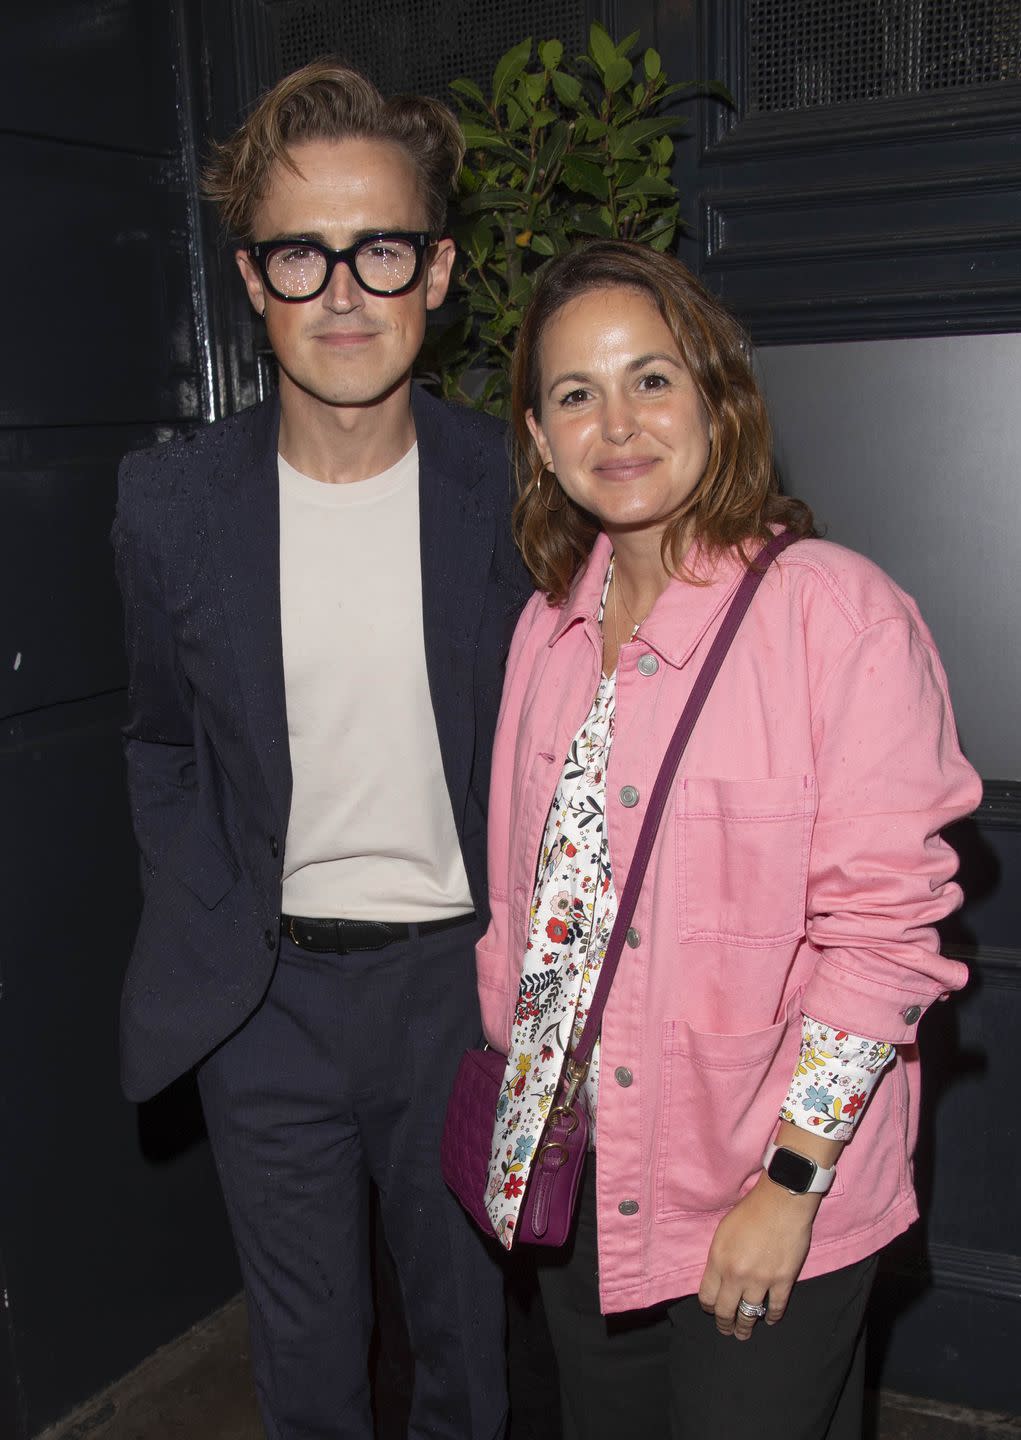 tom fletcher, a man wearing a white shirt and navy suit with thick black glasses, and giovanna fletcher, a woman with short brown hair wearing a pink demin jacket, pose and smile together in front of a leafy plant